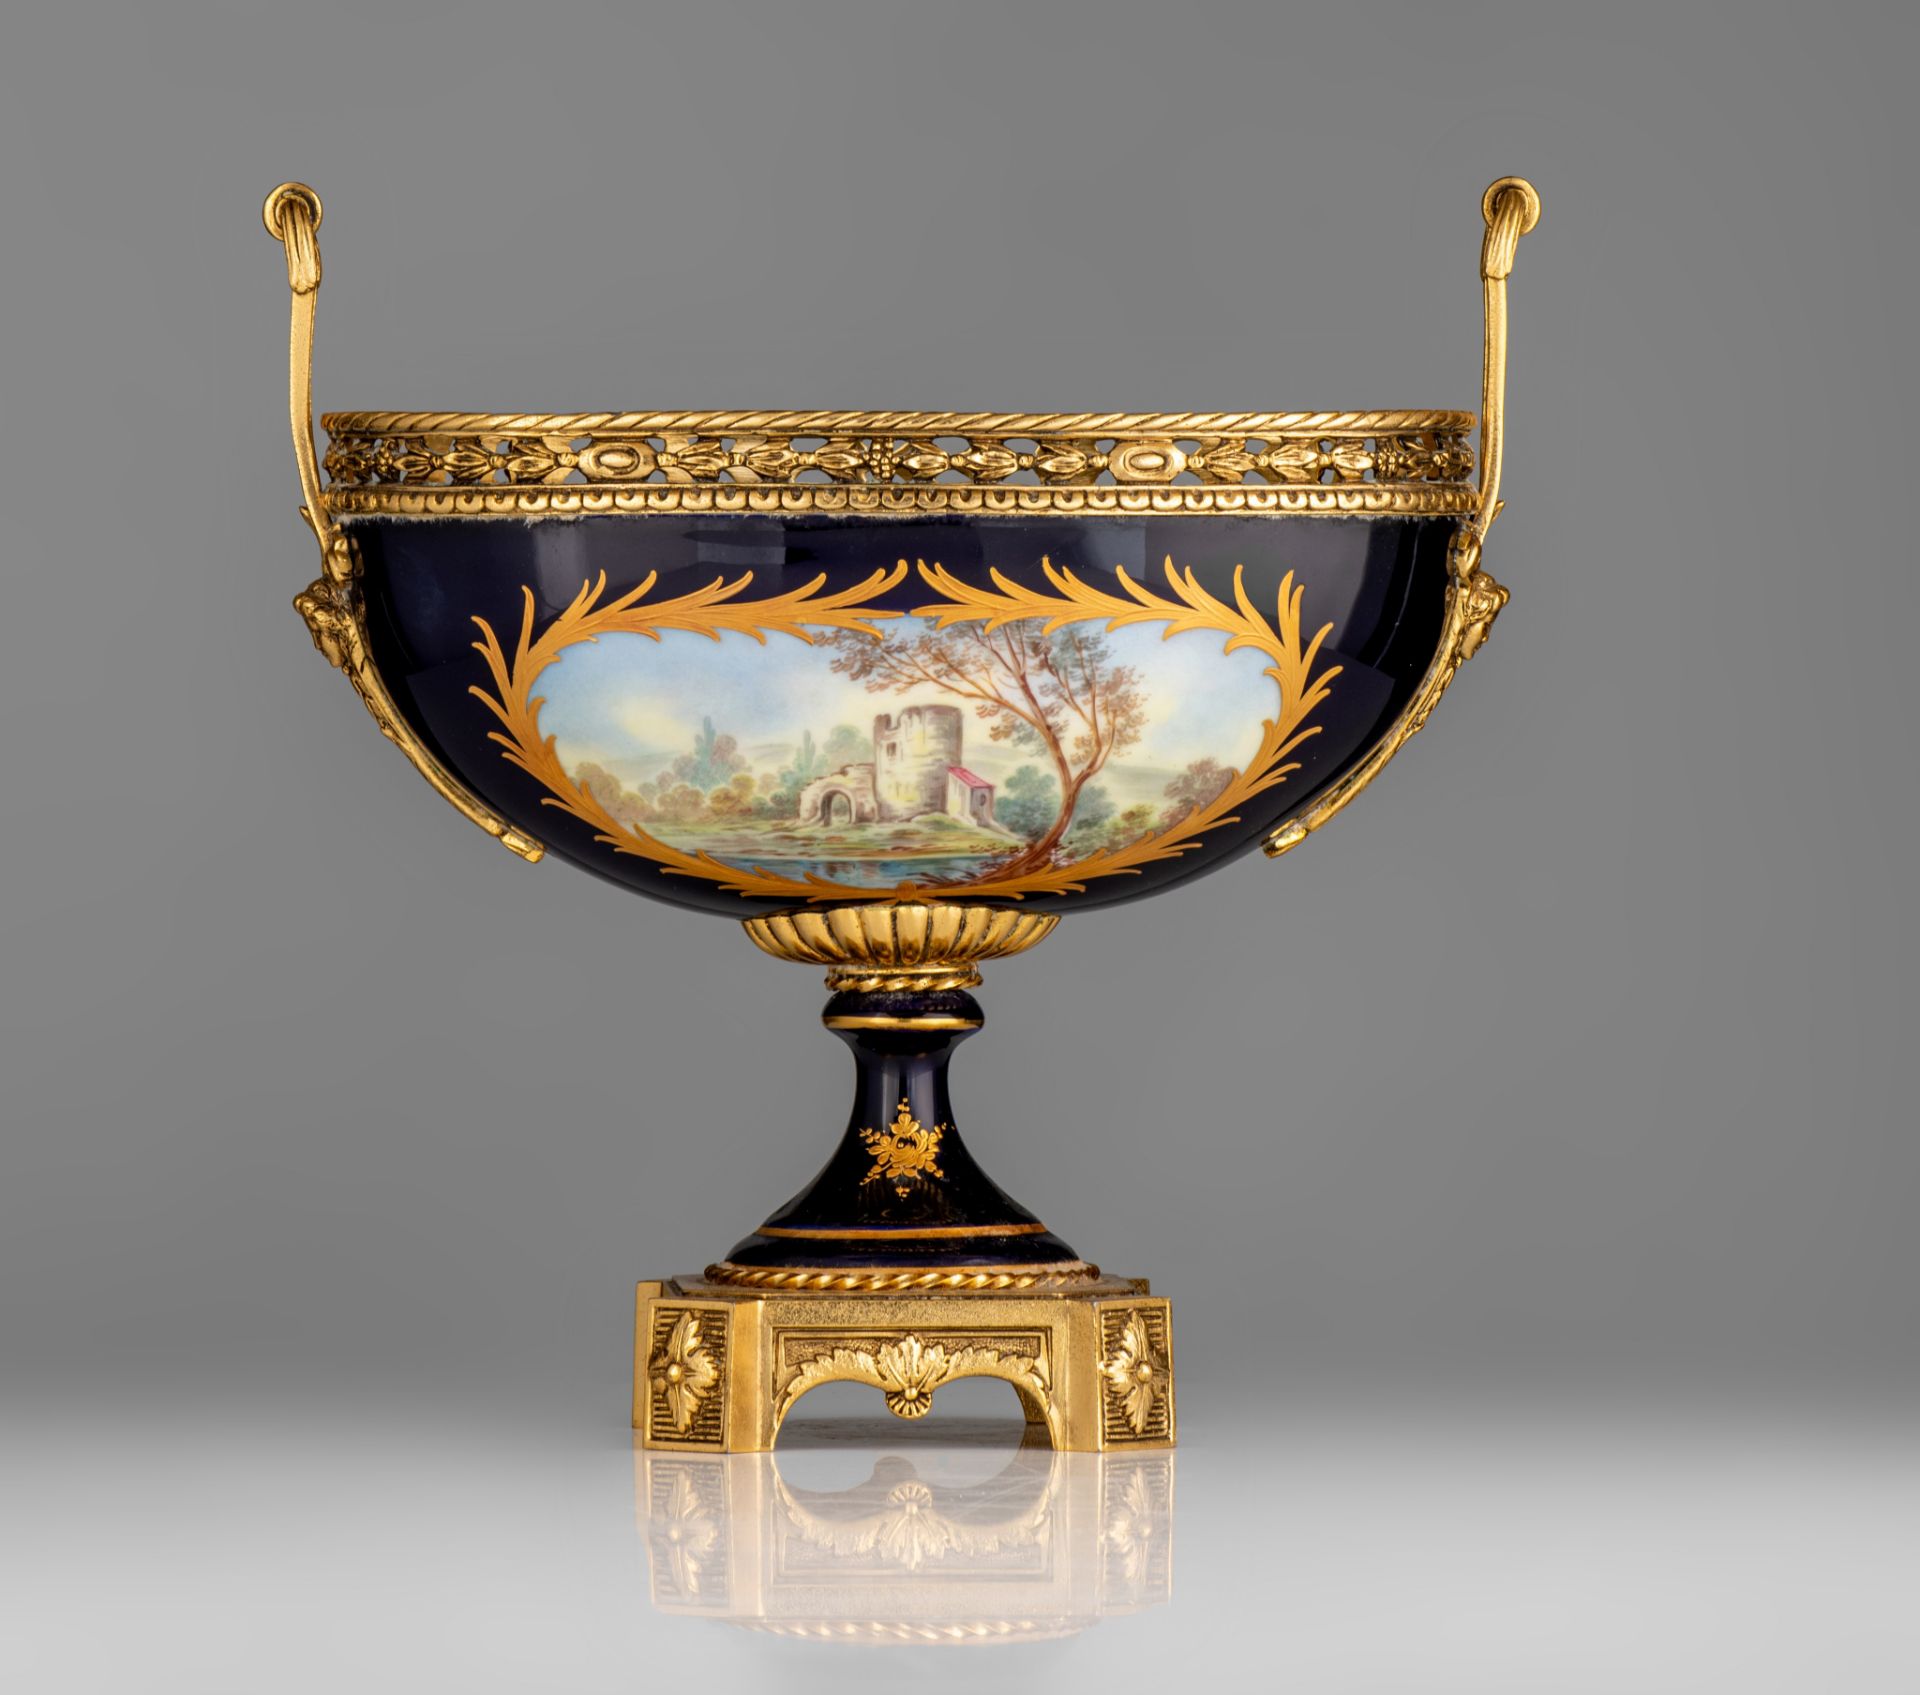 A three-piece Sèvres garniture set, decorated with gallant scenes, signed 'J. Césana', H 28,5 - 42,5 - Image 4 of 15